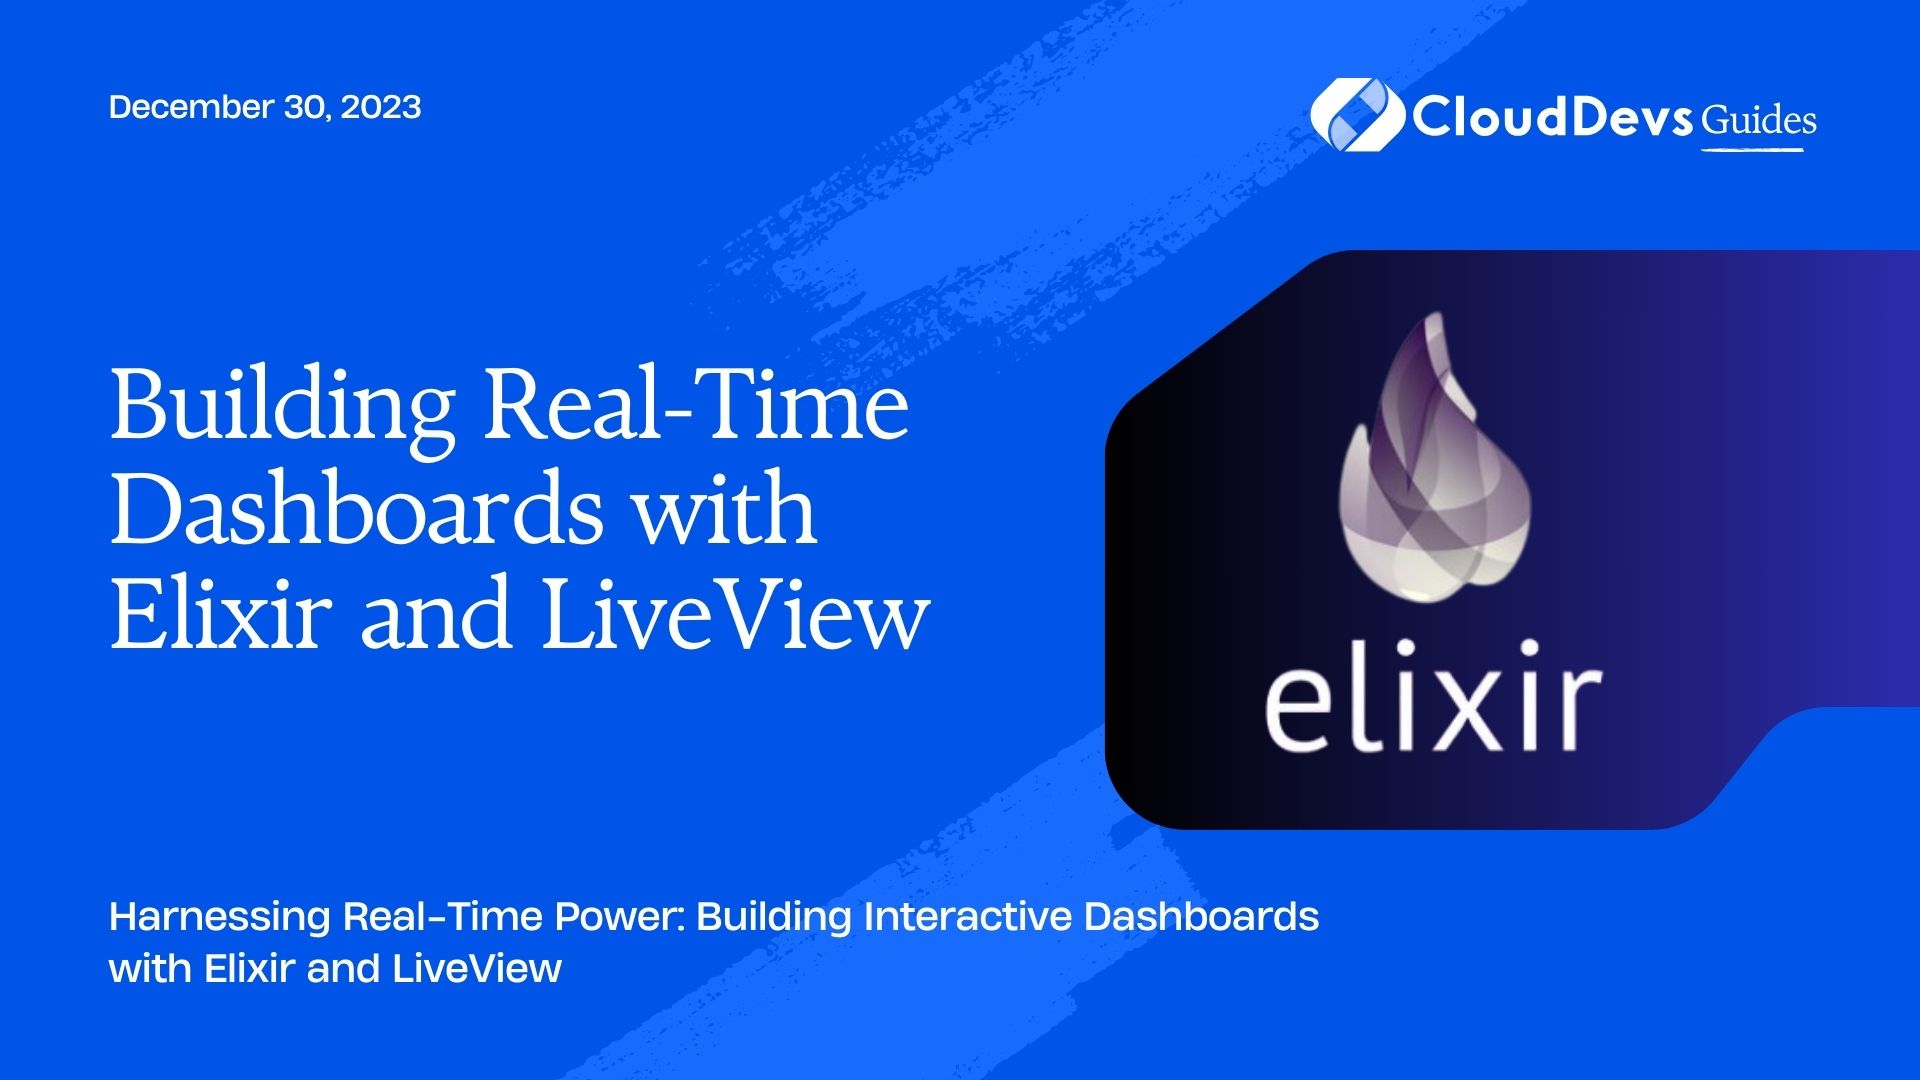 Building Real-Time Dashboards with Elixir and LiveView